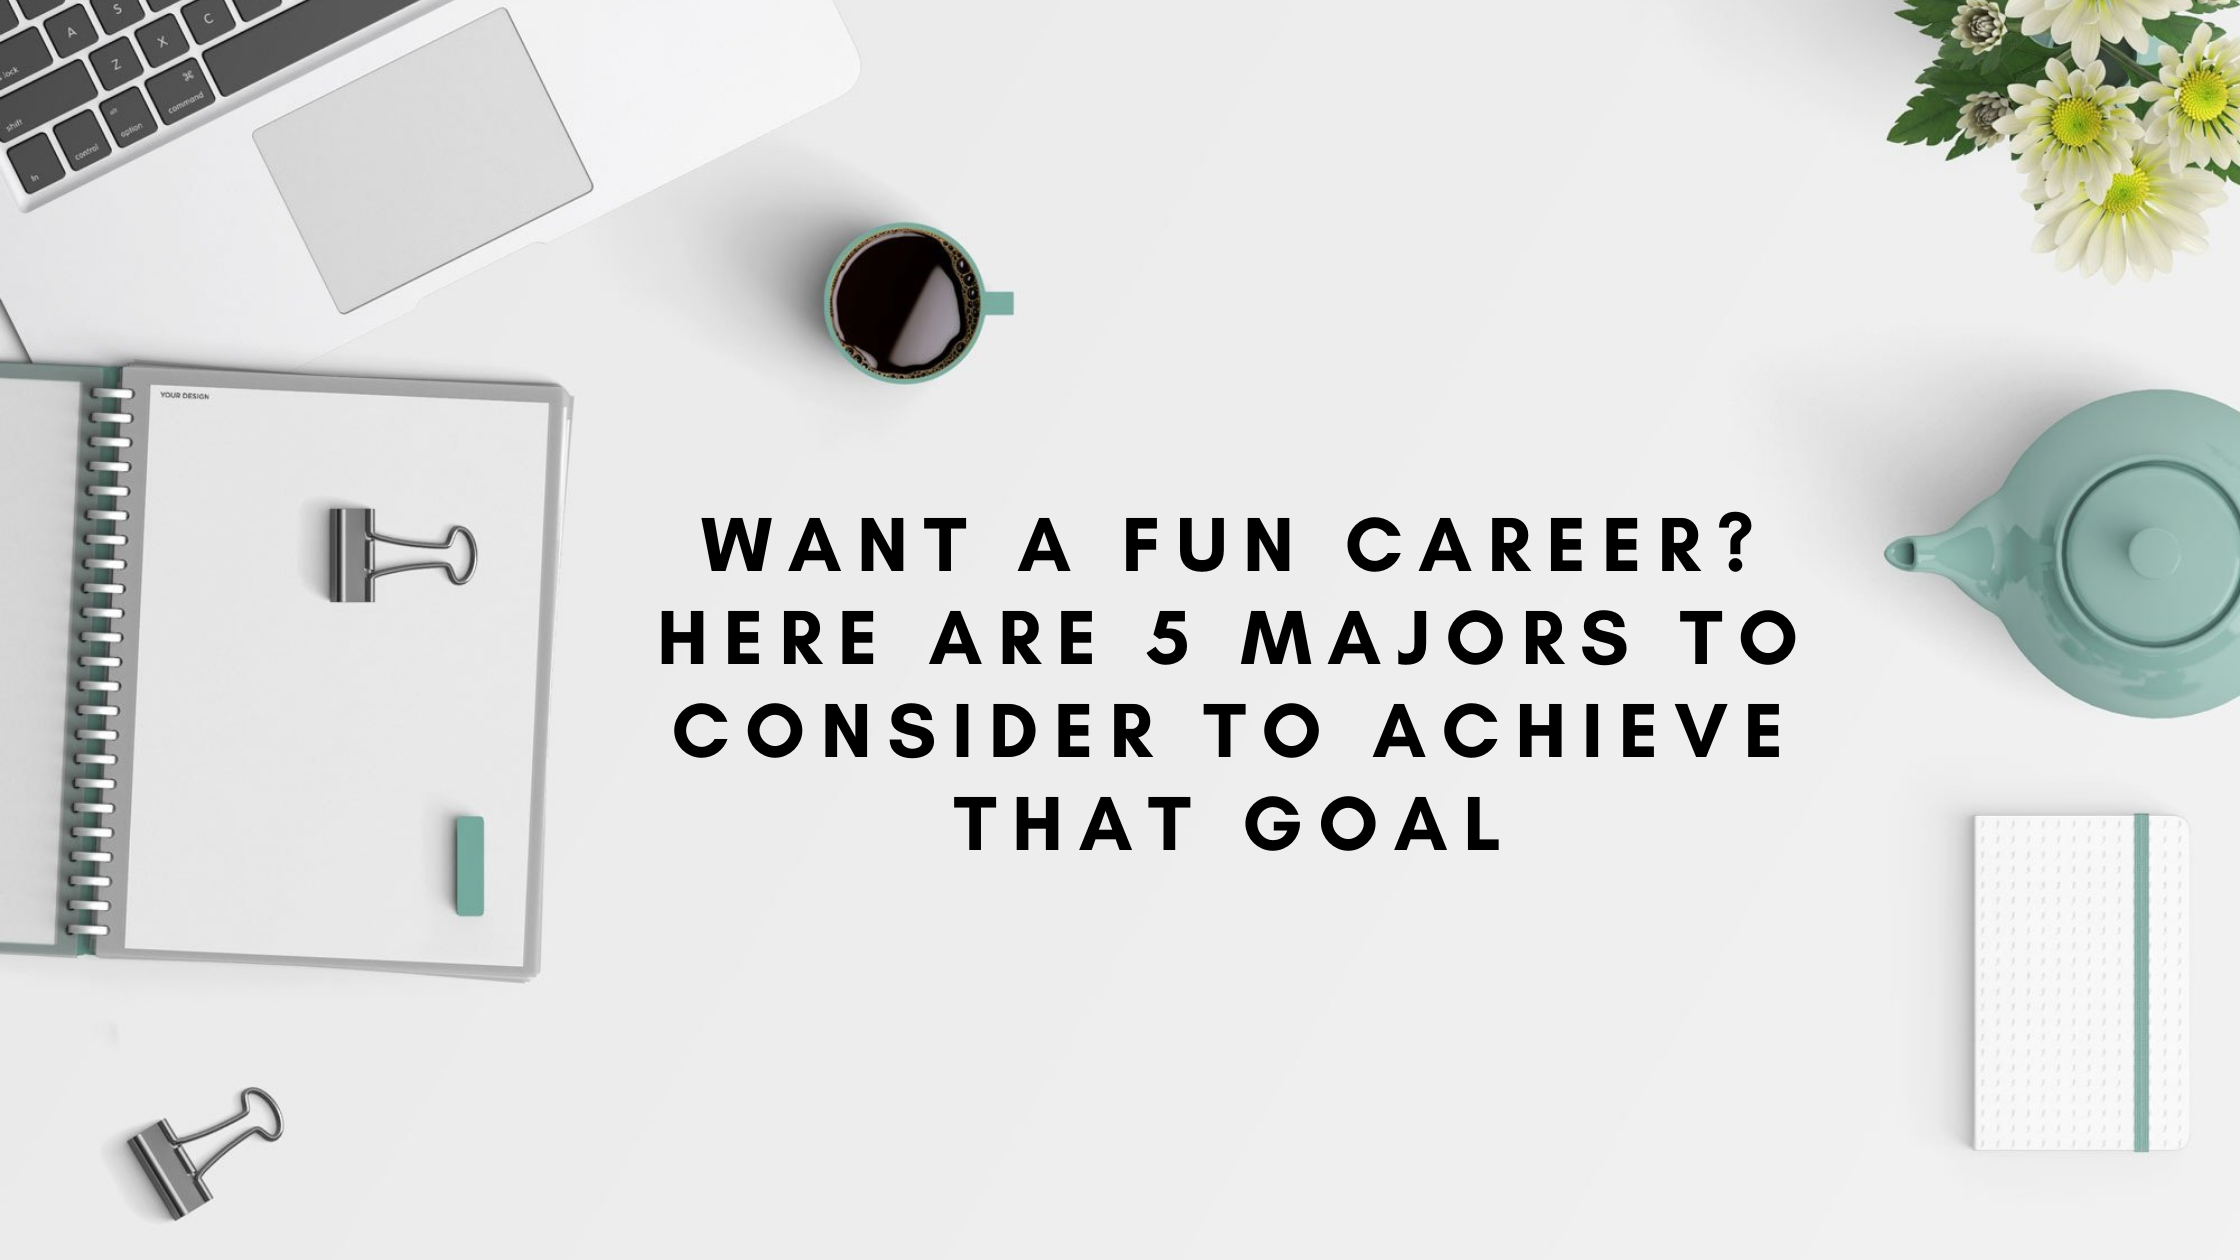 Image of 5 Majors That Can Help Launch a Fun, High-Paying Career  